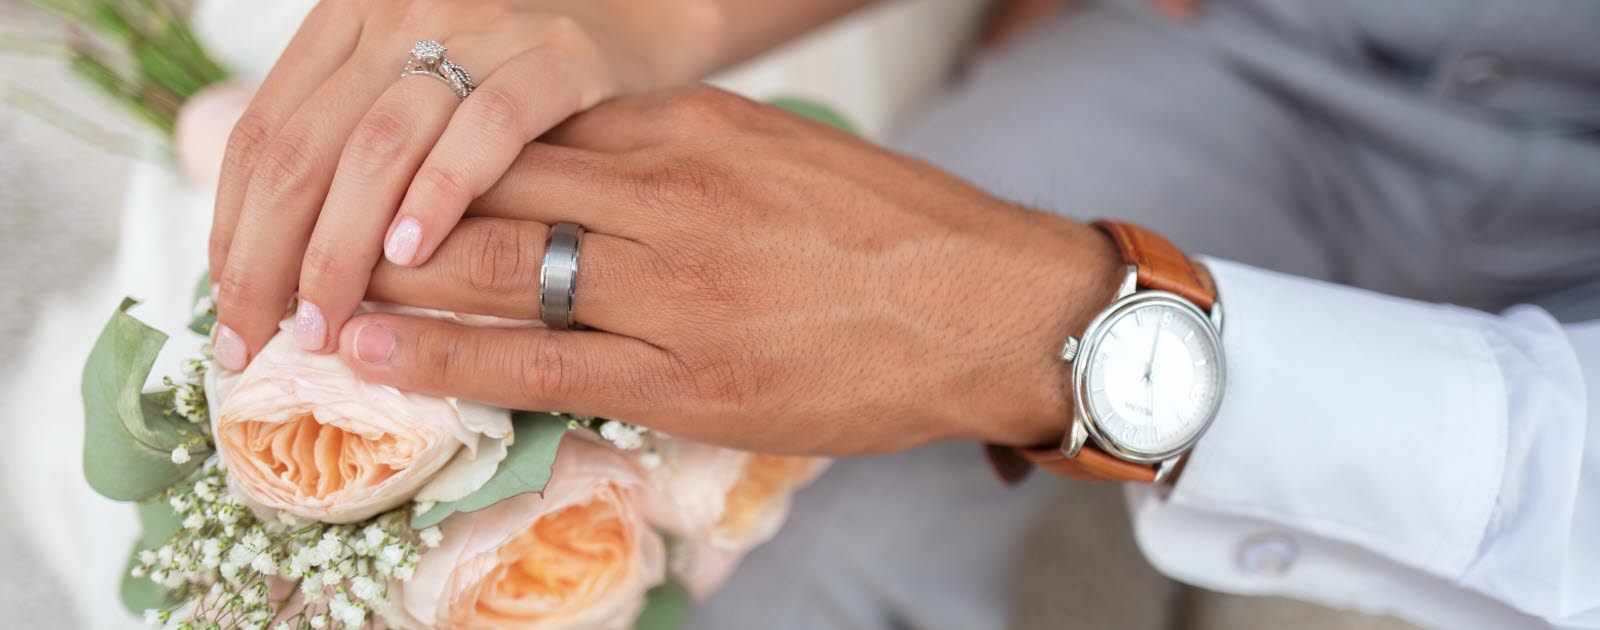 Female hand with wedding band over male hand with wedding band, both on top of a bouquet.